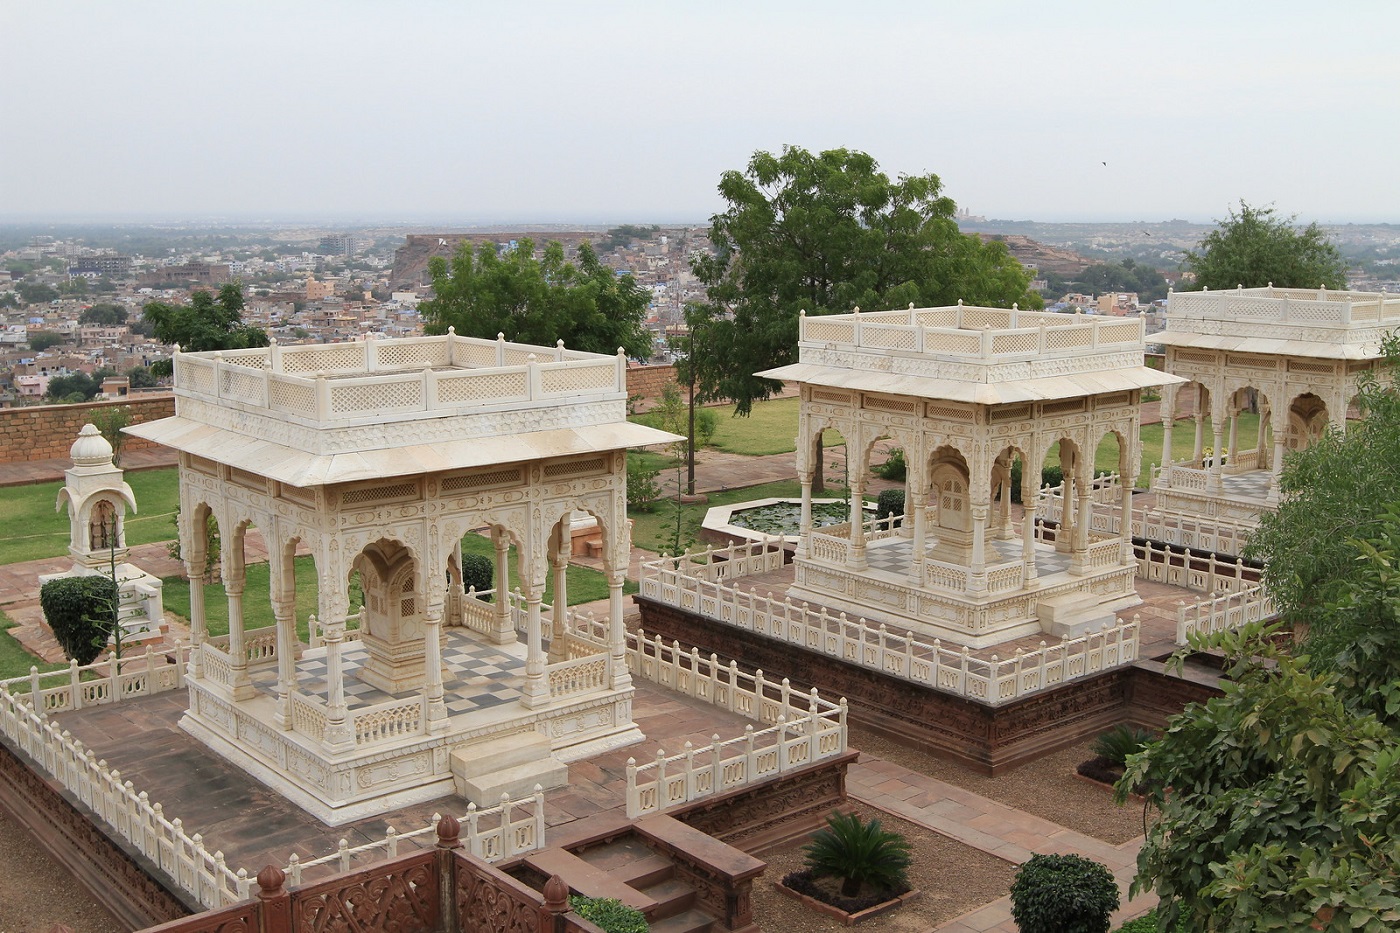 A complete Information about Jaswant Thada Jodhpur - History, Timing